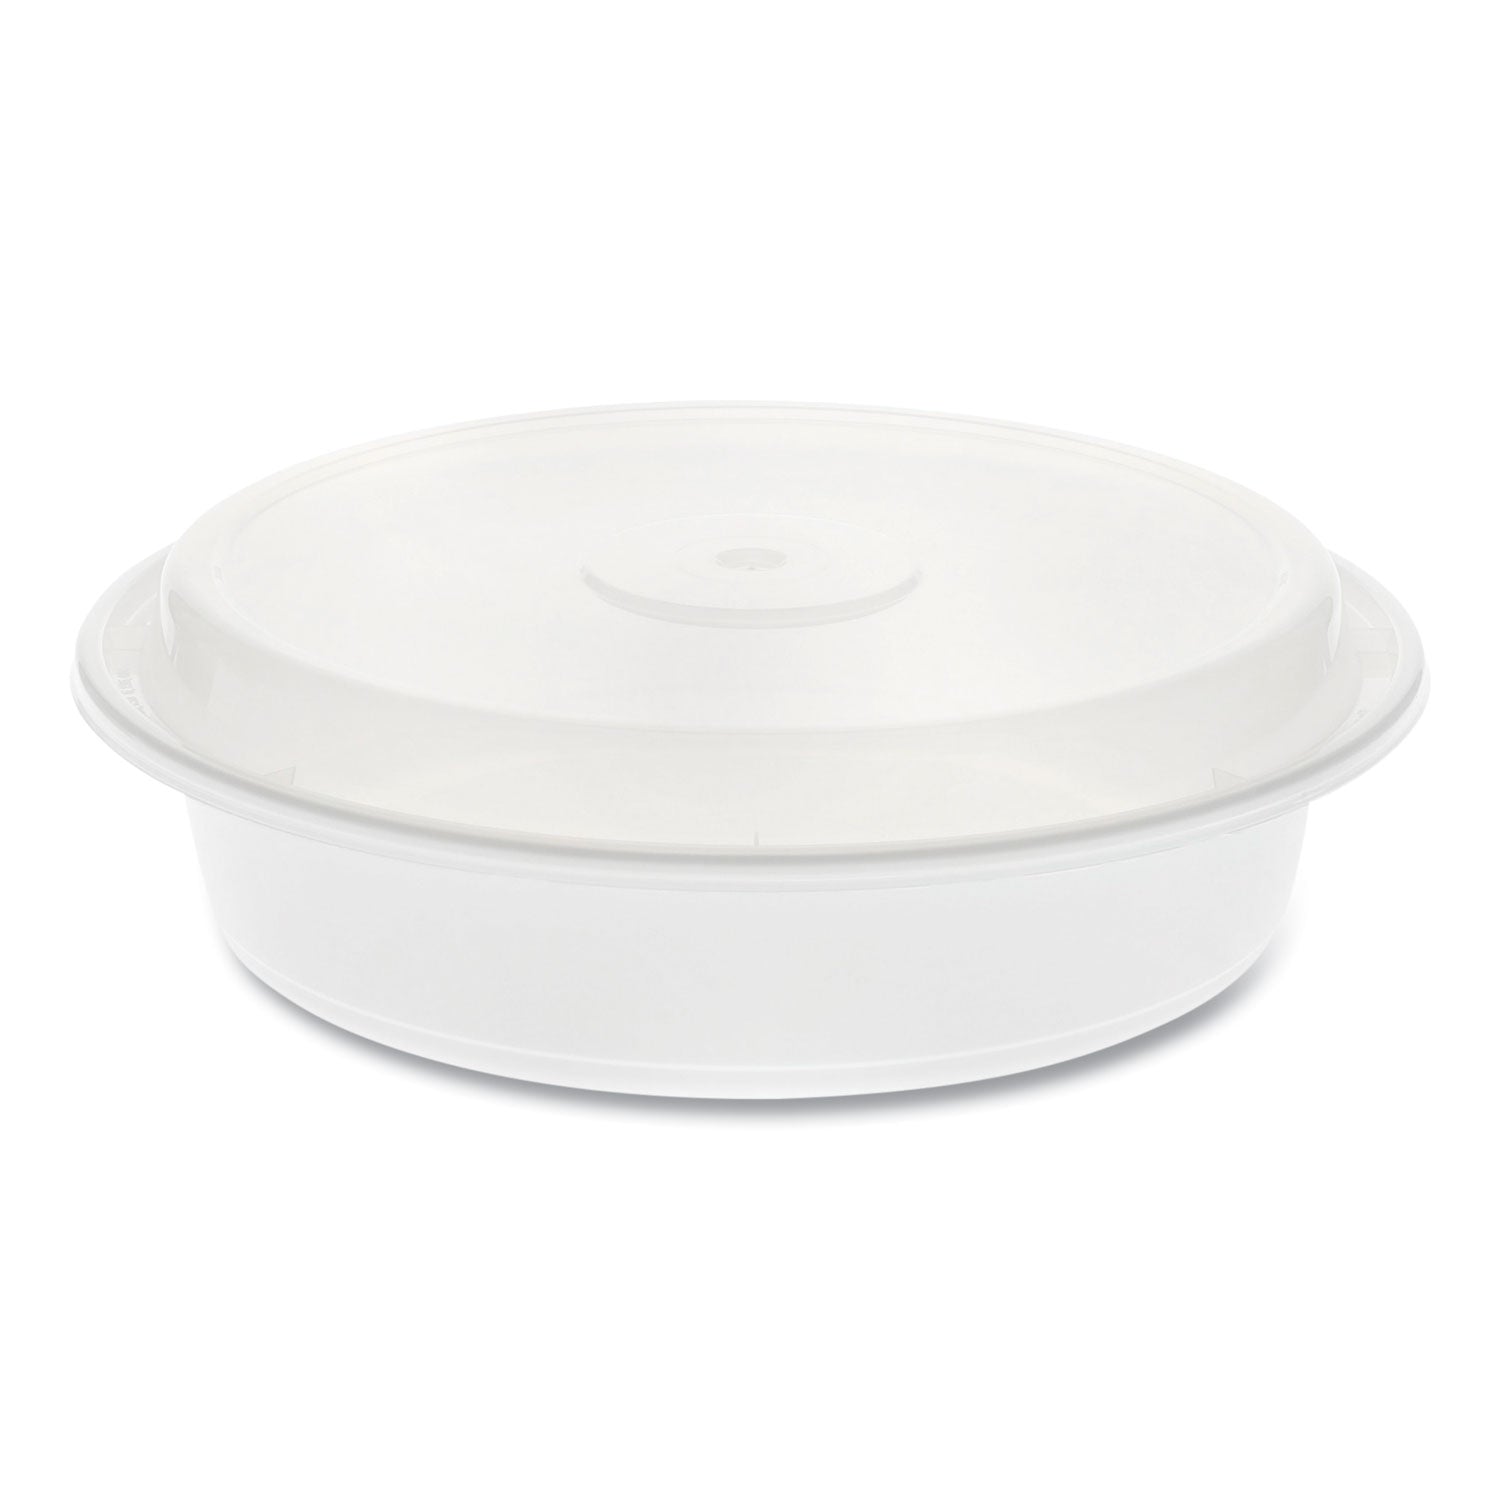 newspring-versatainer-microwavable-containers-round-35-oz-8-x-8-x-25-white-clear-plastic-150-carton_pctnc737 - 1